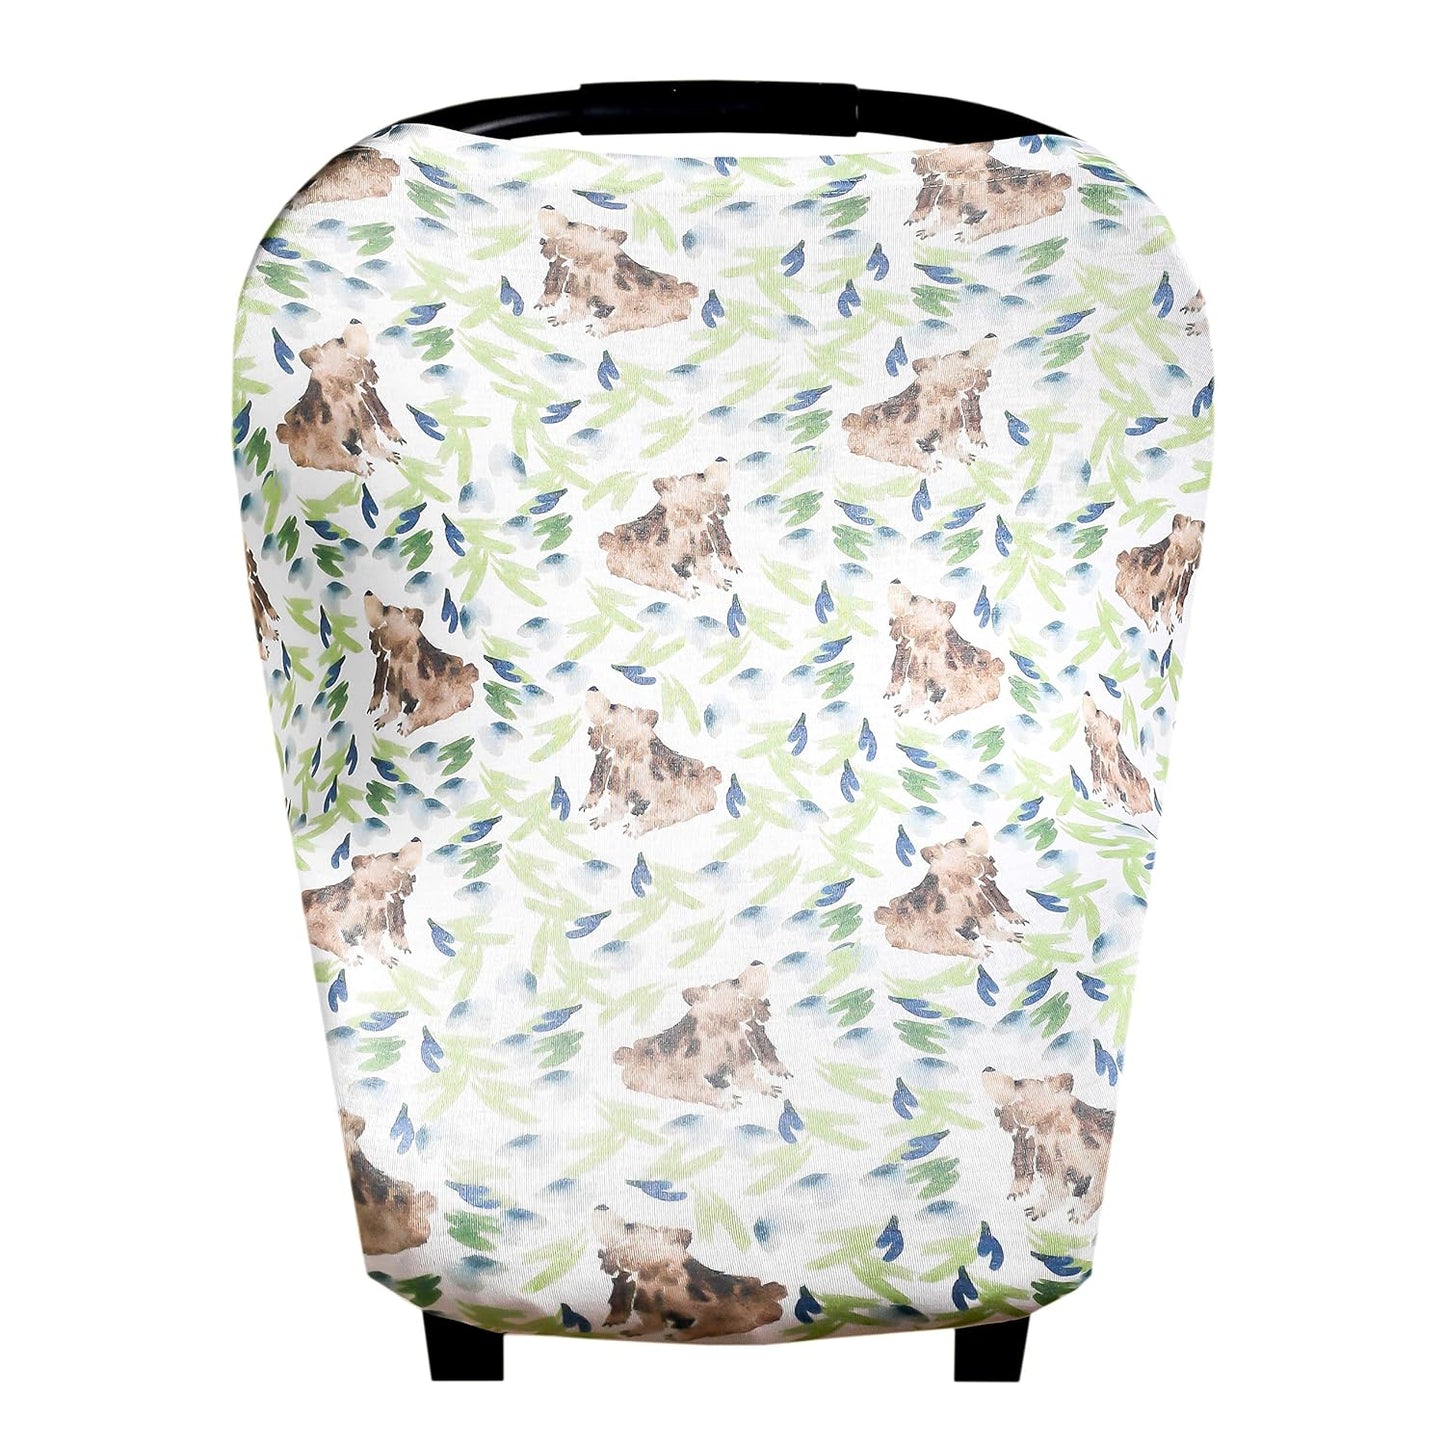 Baby Car Seat Cover Canopy and Nursing Cover Multi-Use Stretchy 5 in 1 Gift "Quill" by Copper Pearl